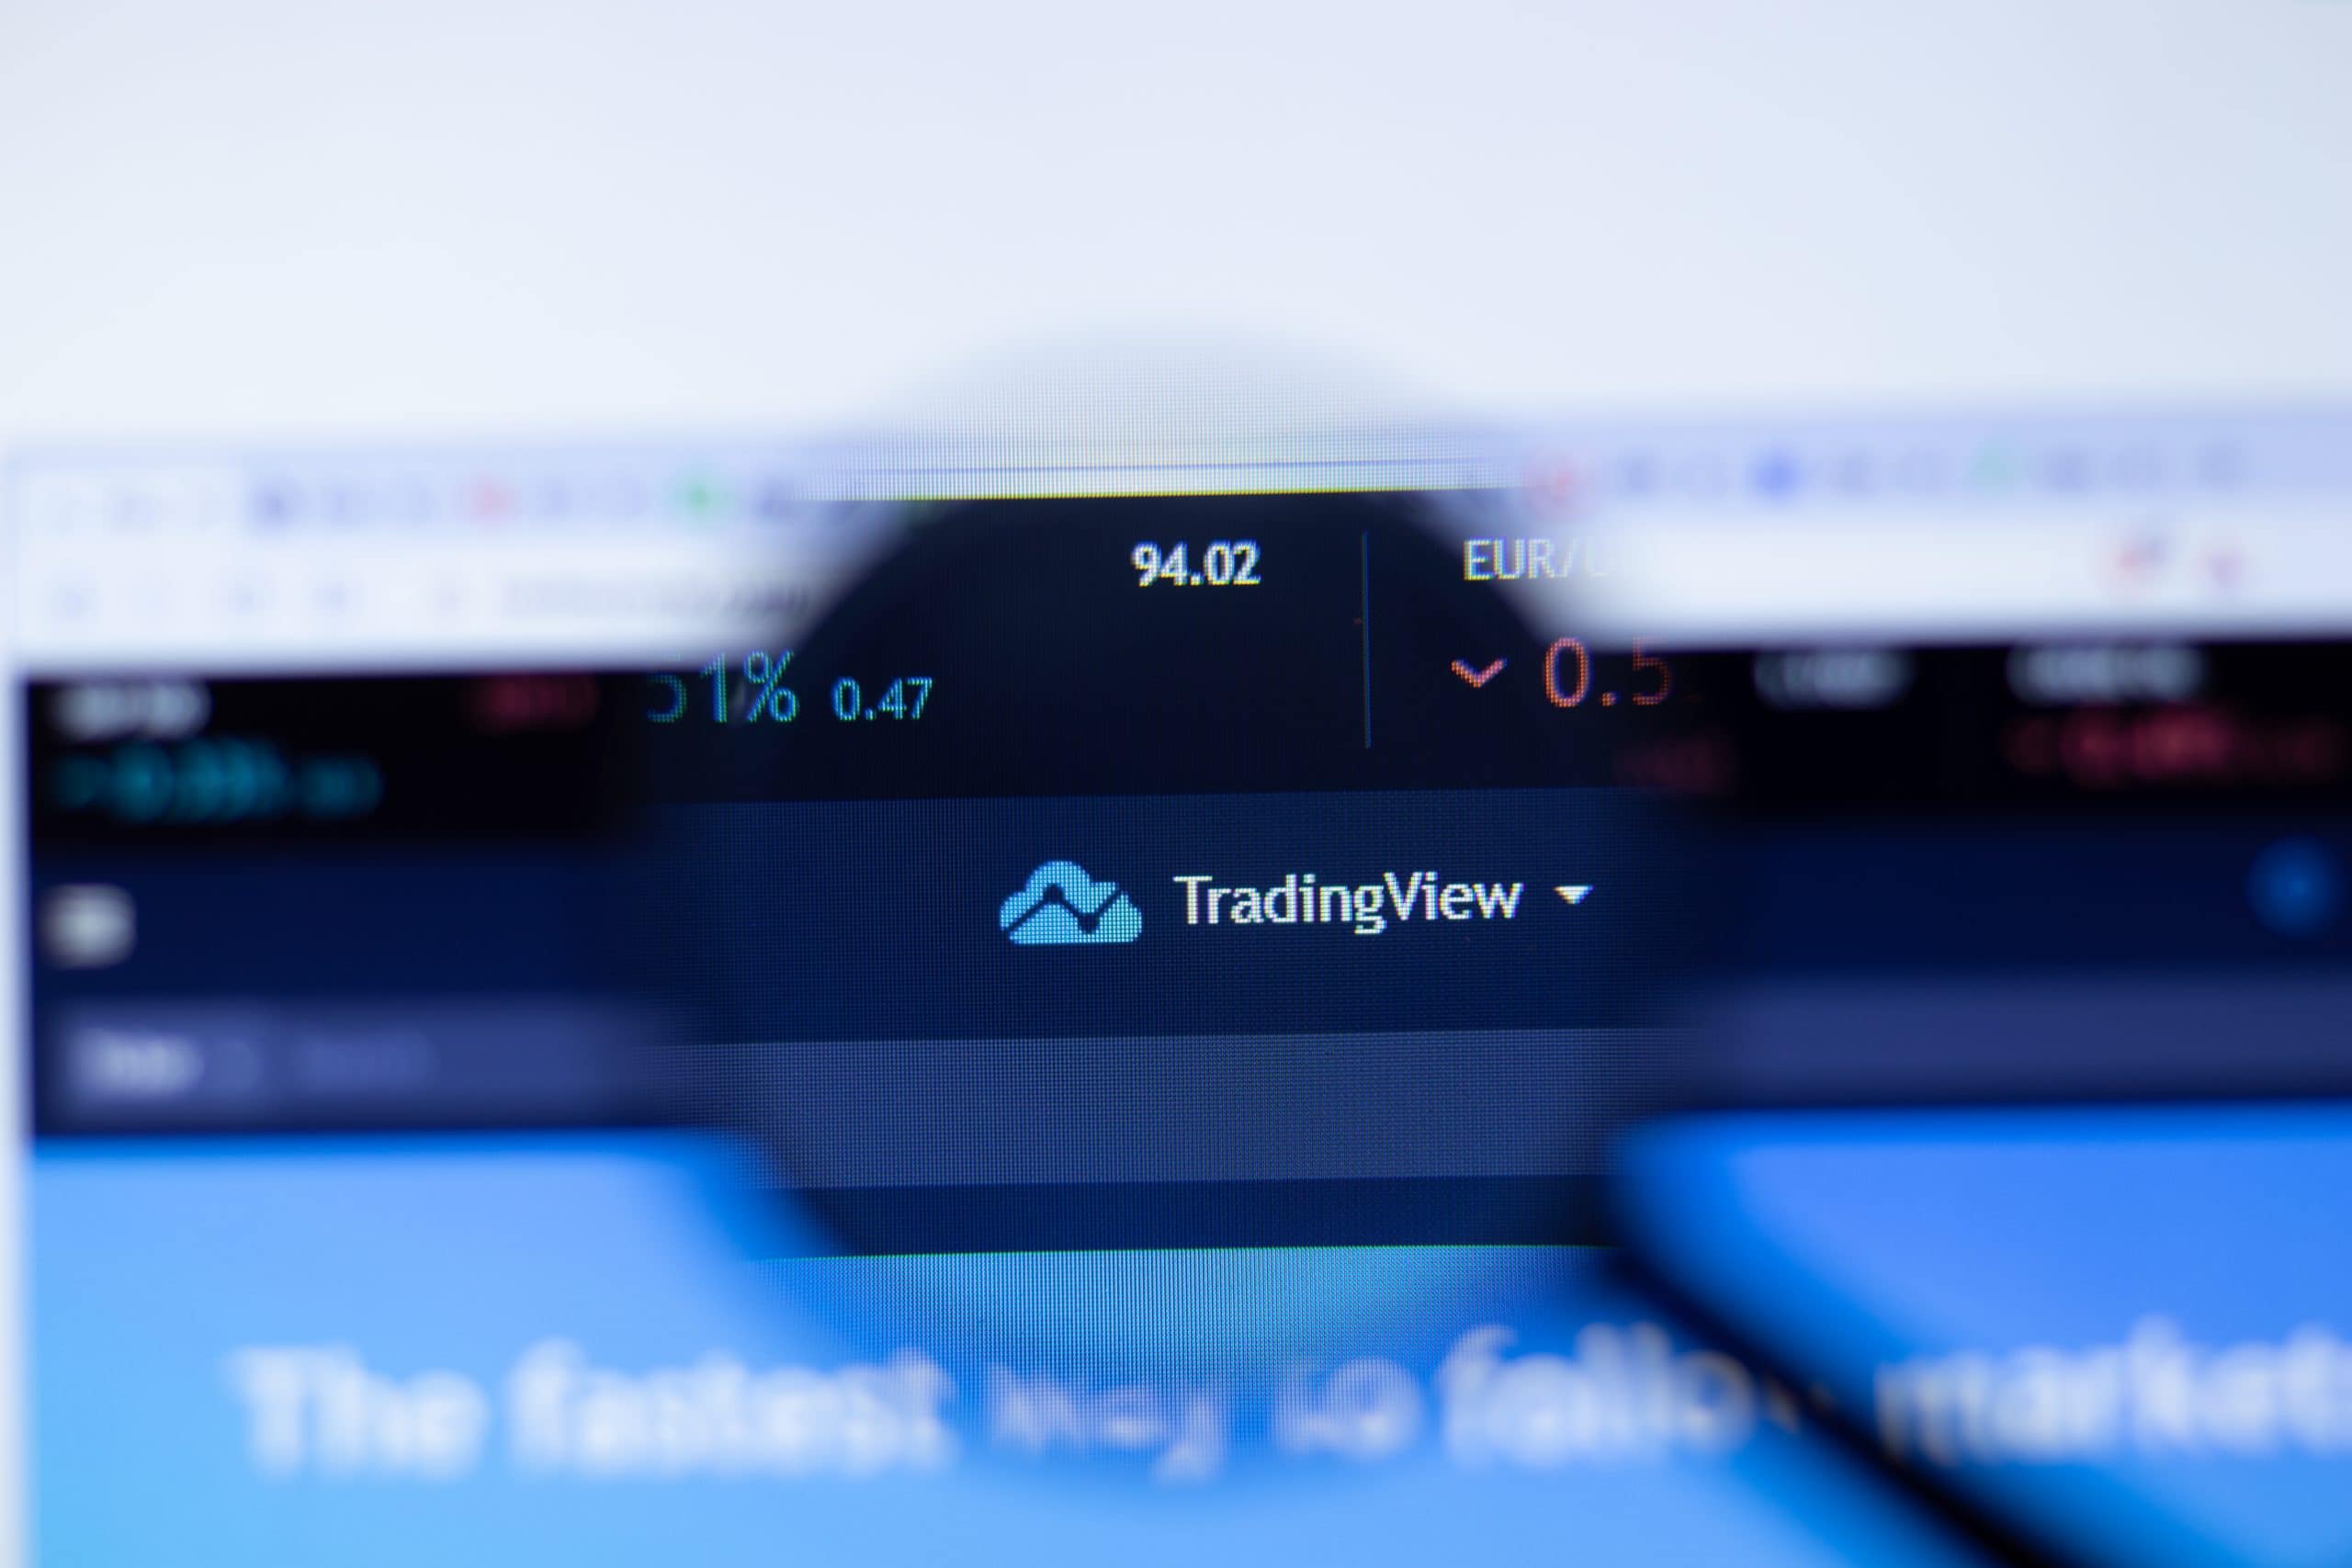 TradingView is now valued at $ 3 billion after a new investment